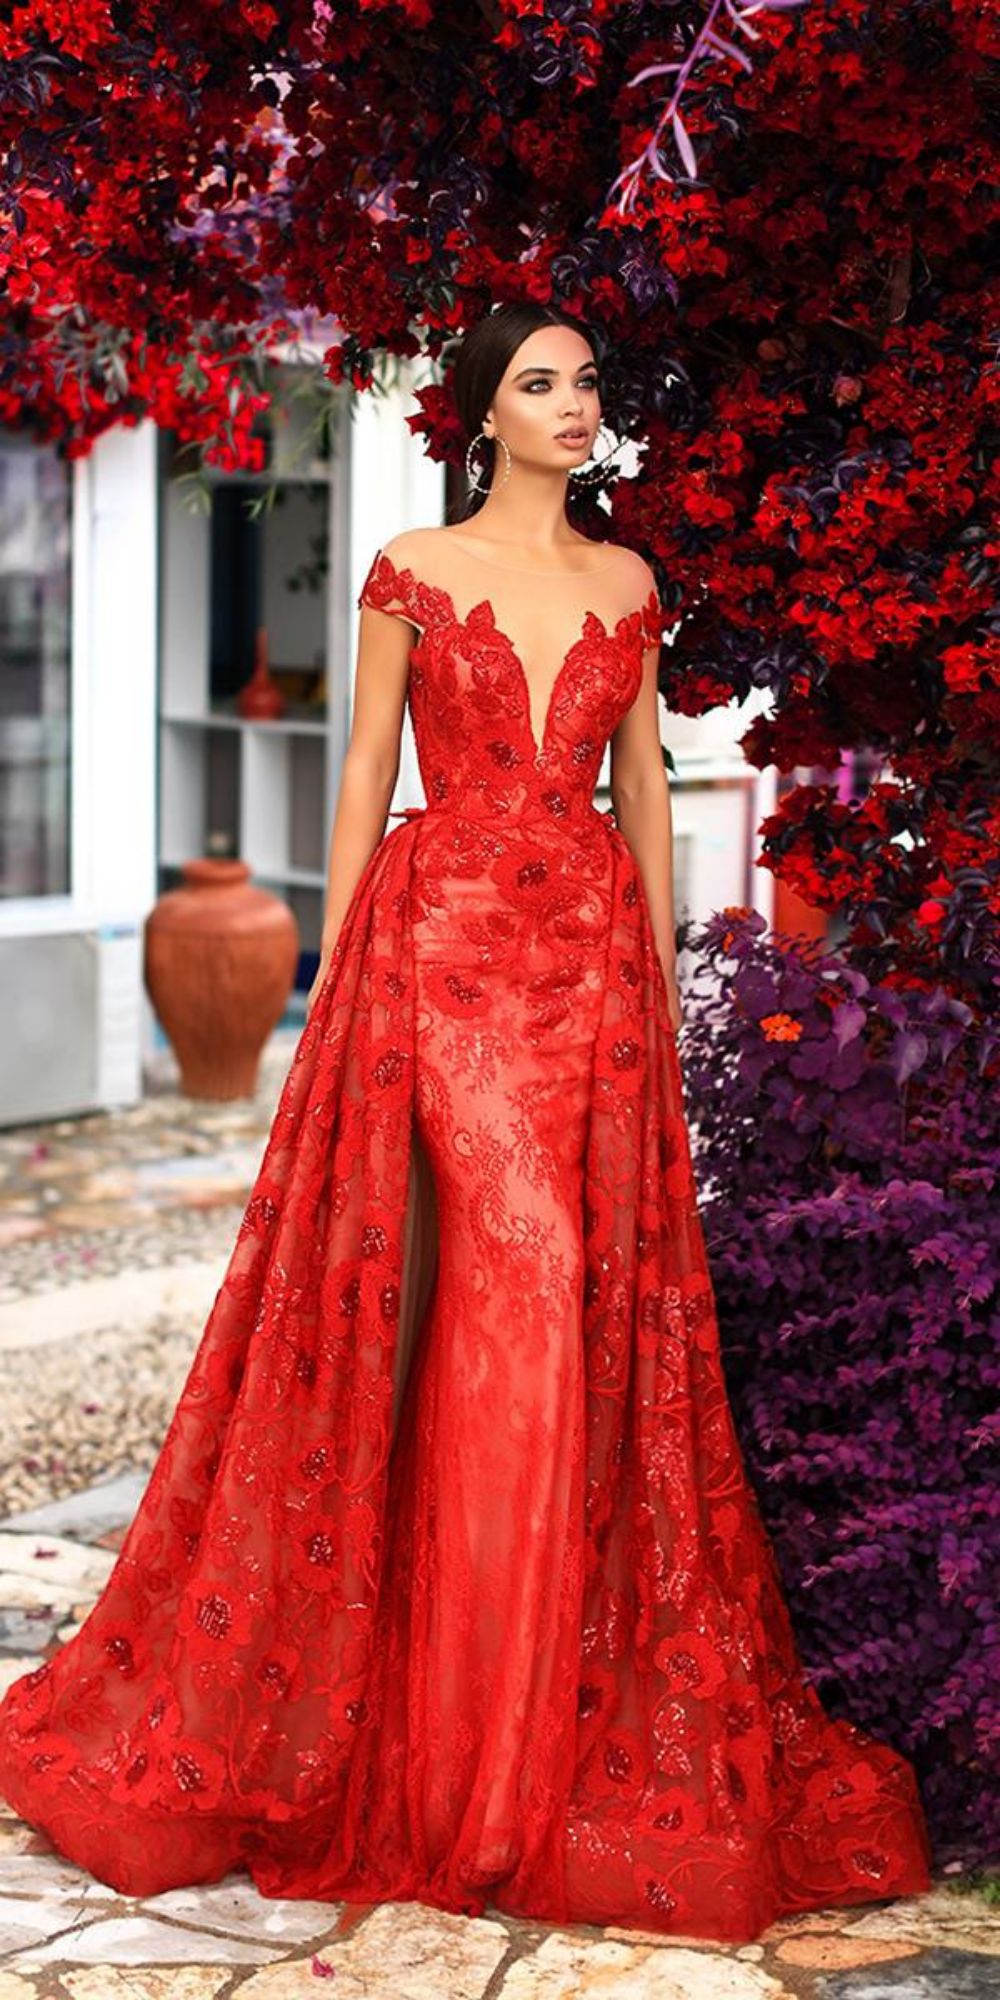 red wedding dresses sheath with overskirt sweetheart neckline lace